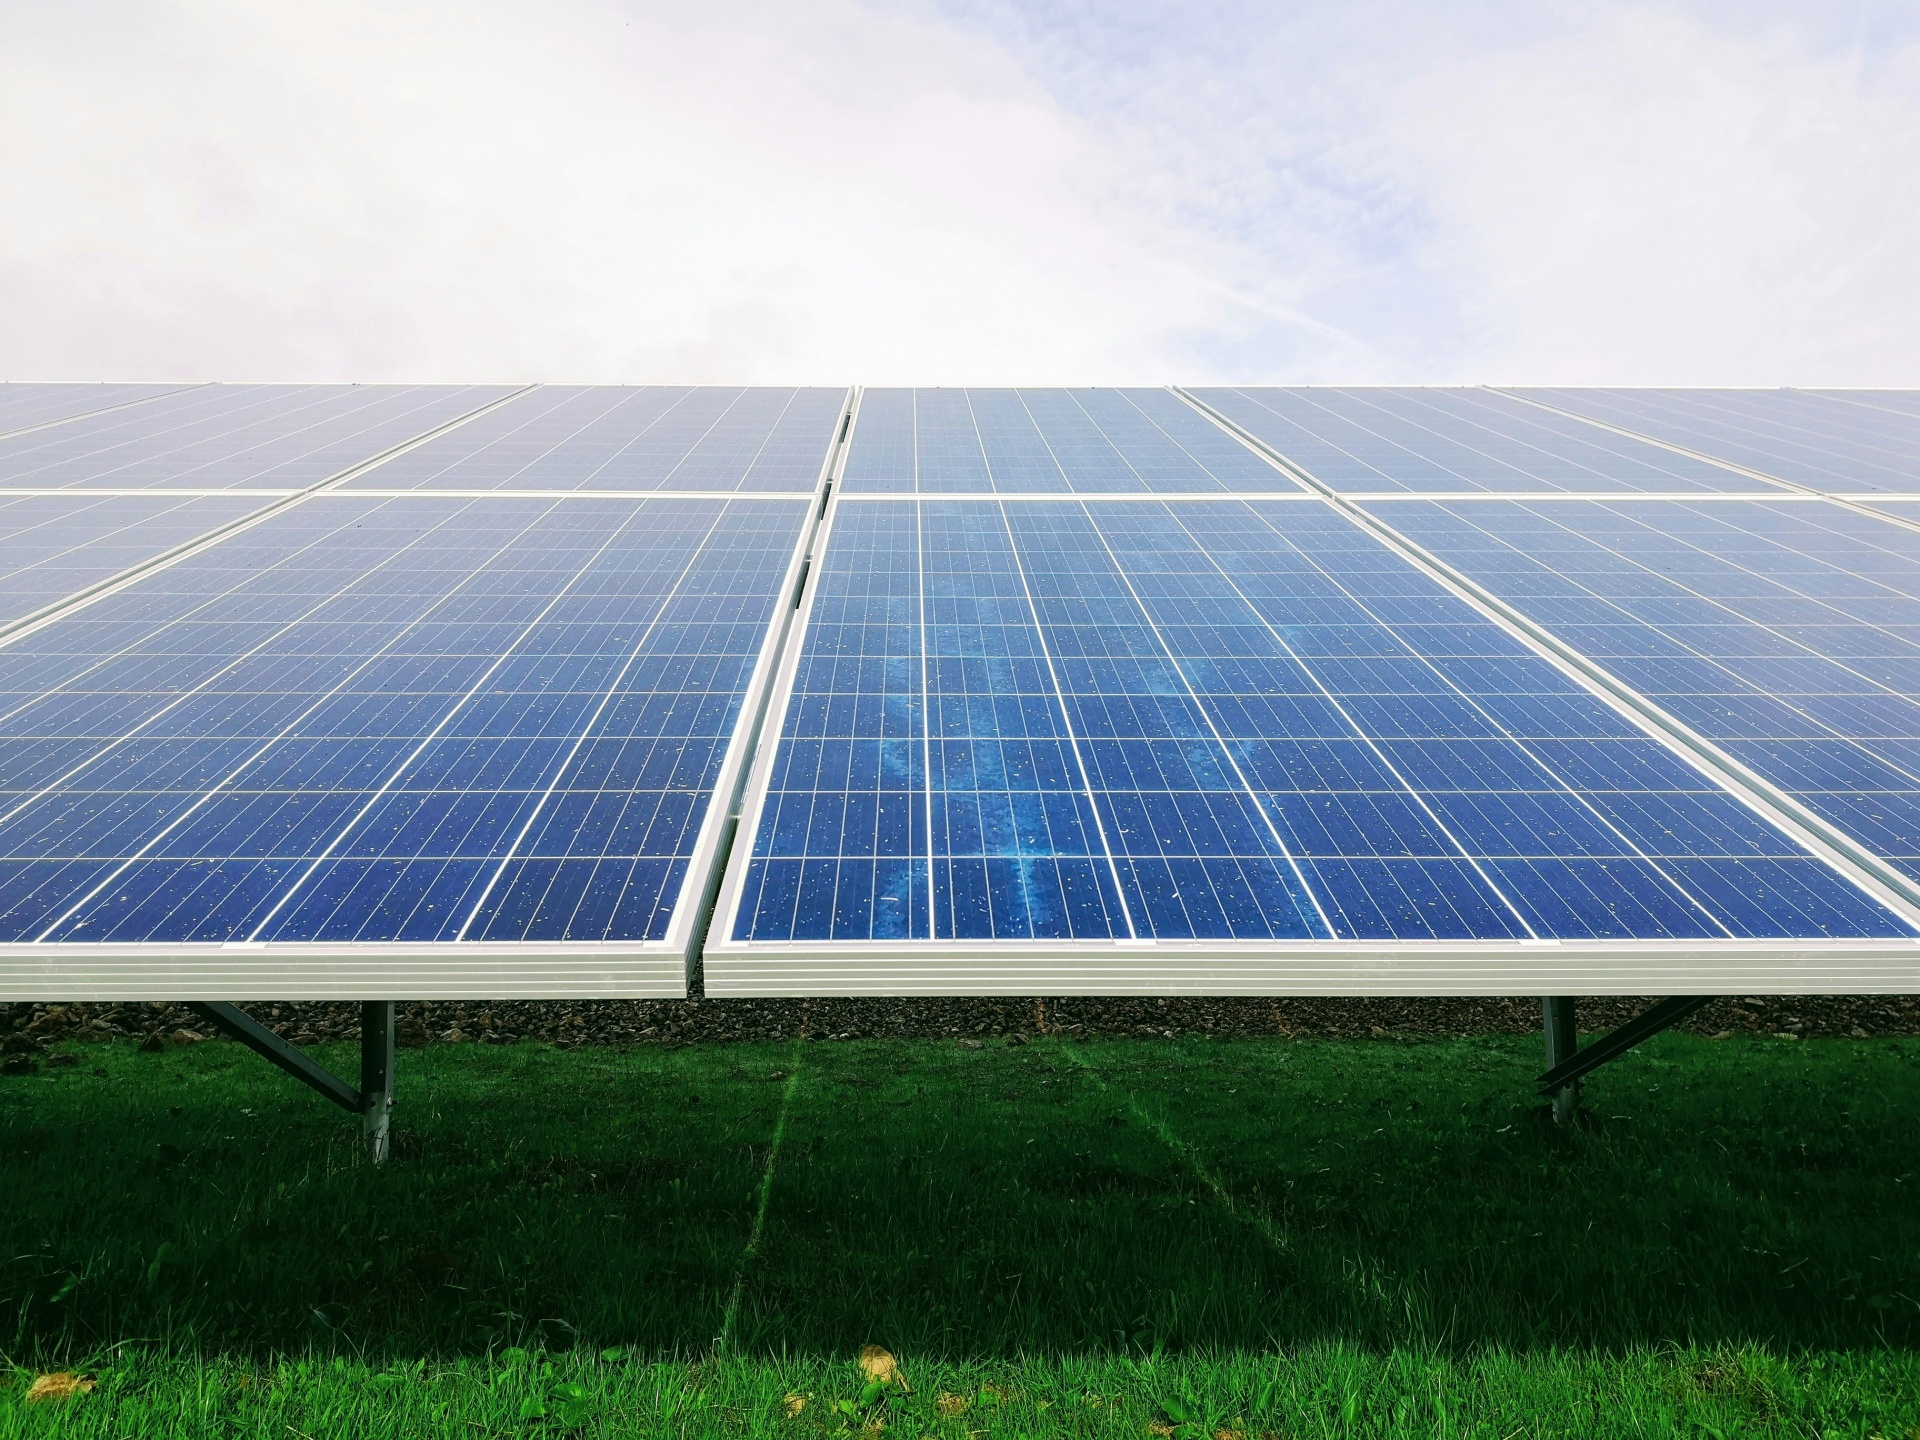 Vietnam authorises DPPA for rooftop solar and biomass projects